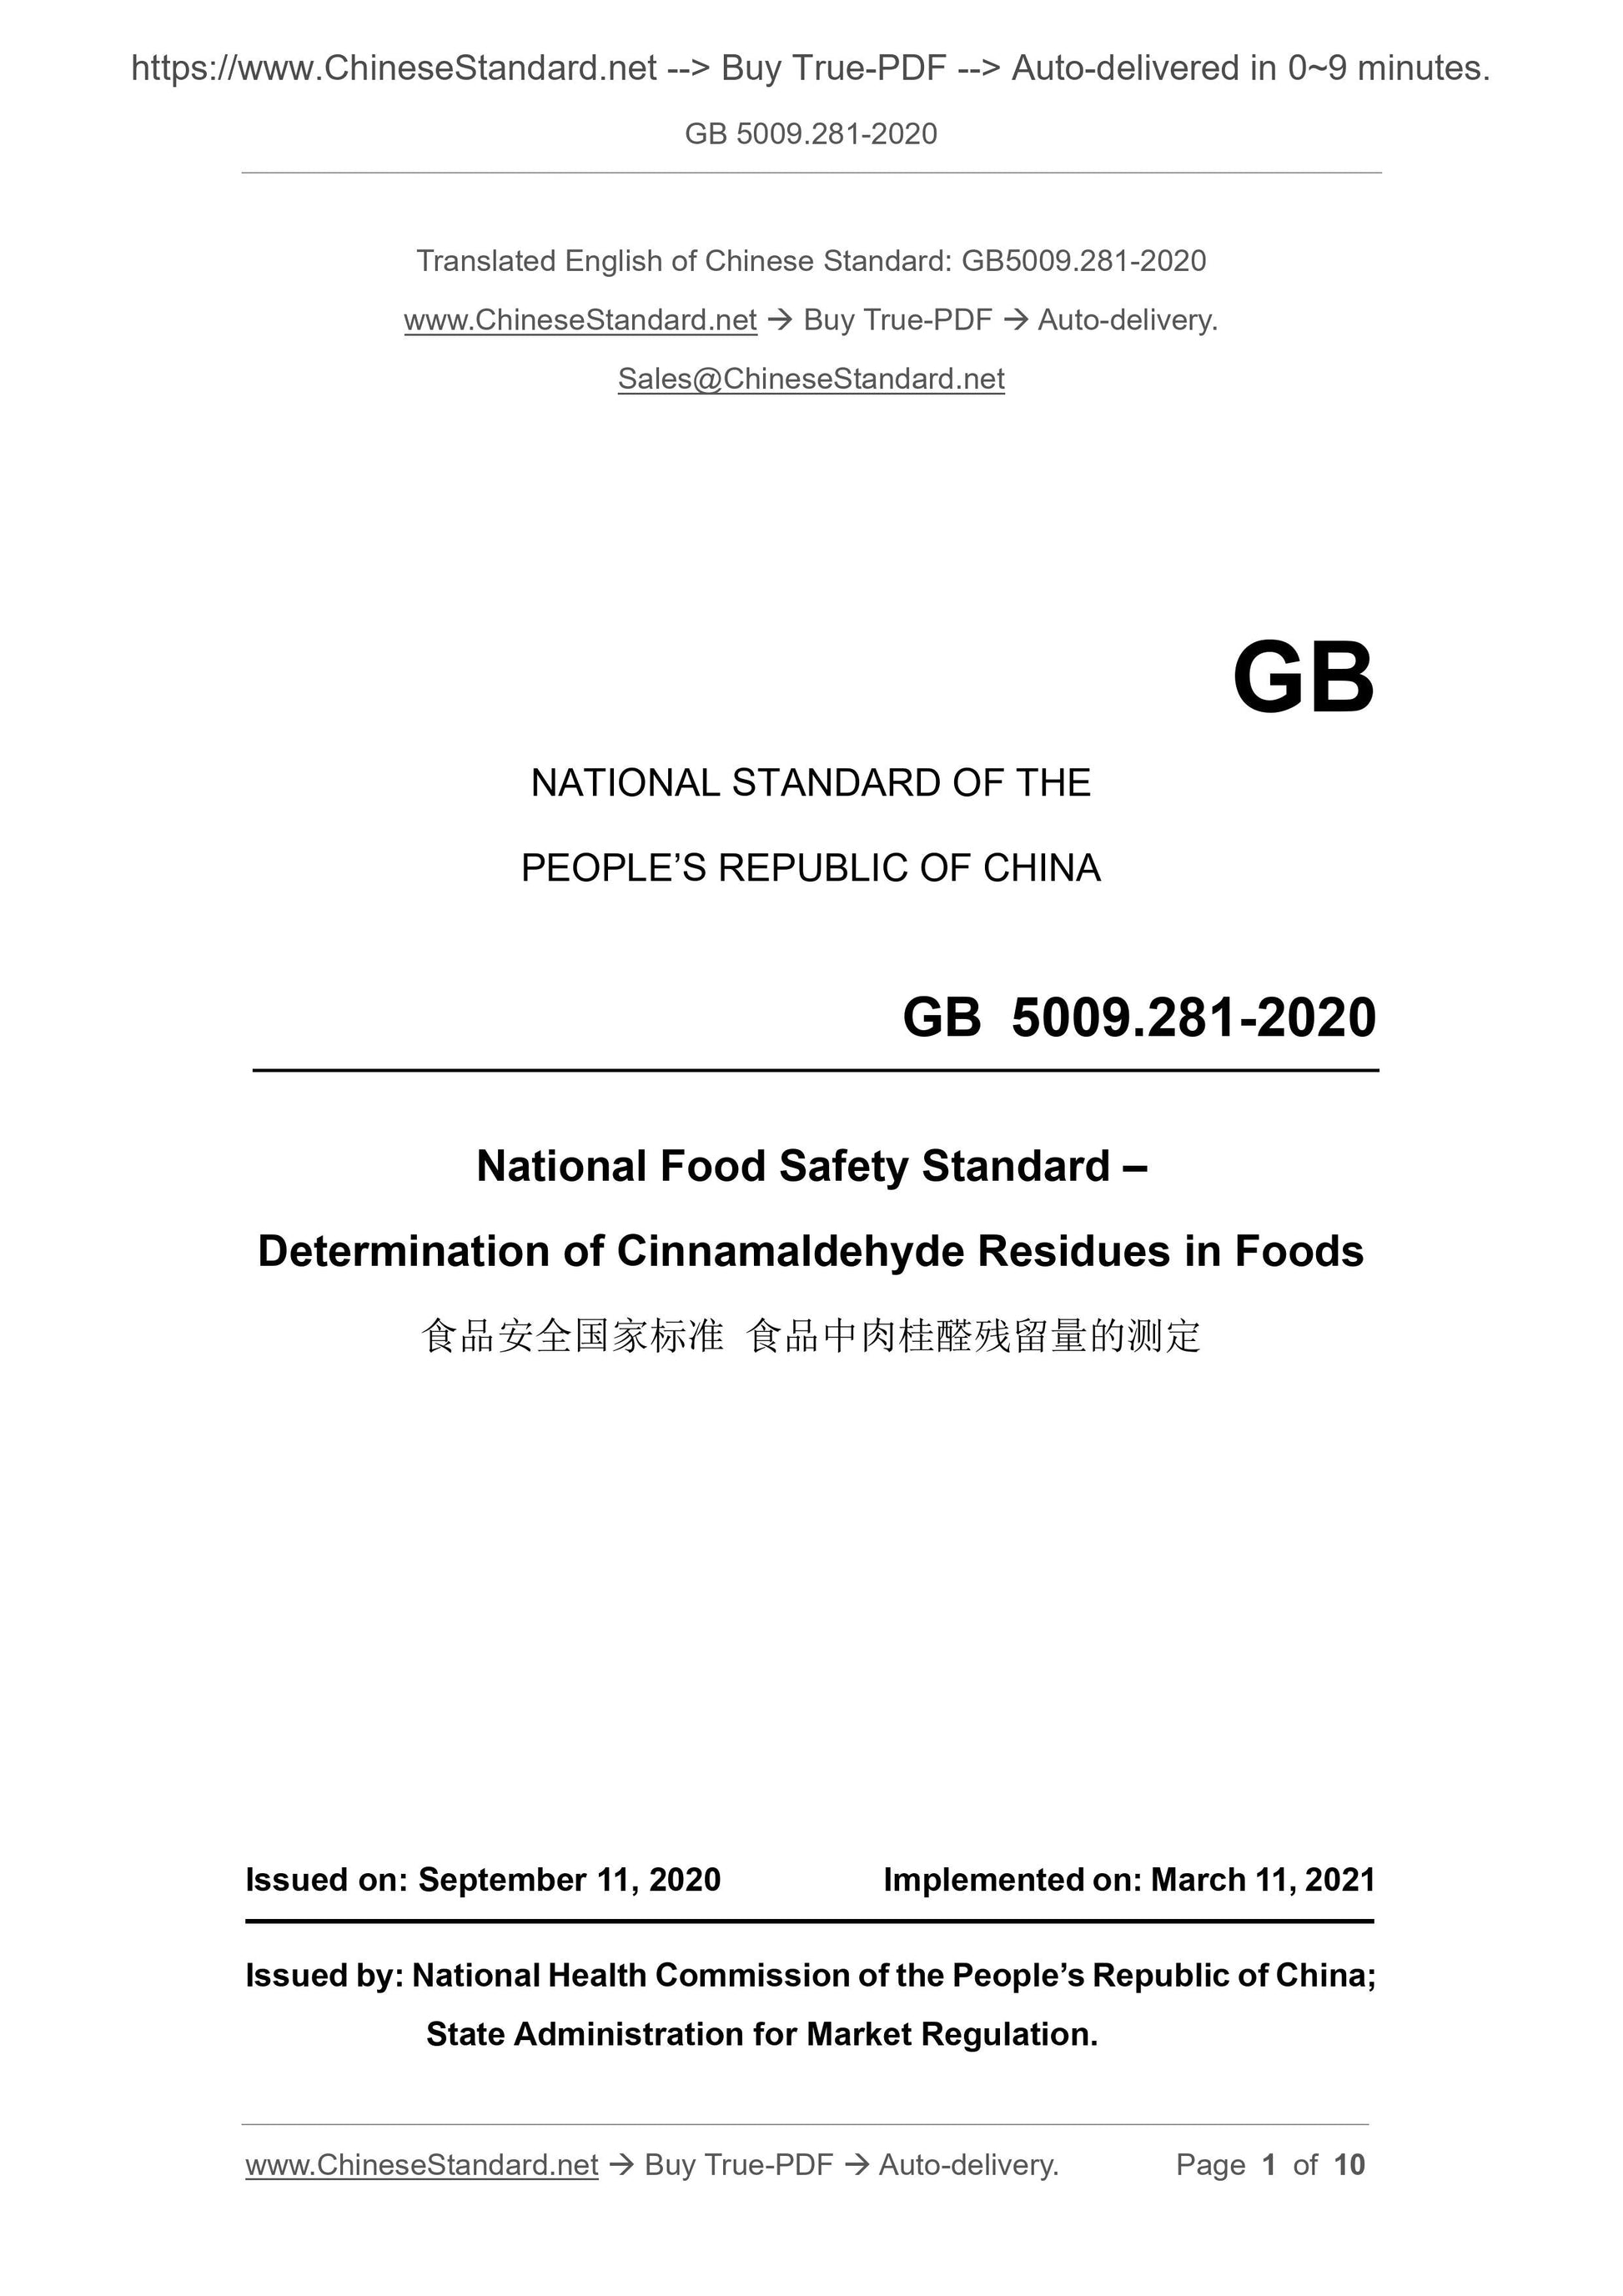 GB 5009.281-2020 Page 1